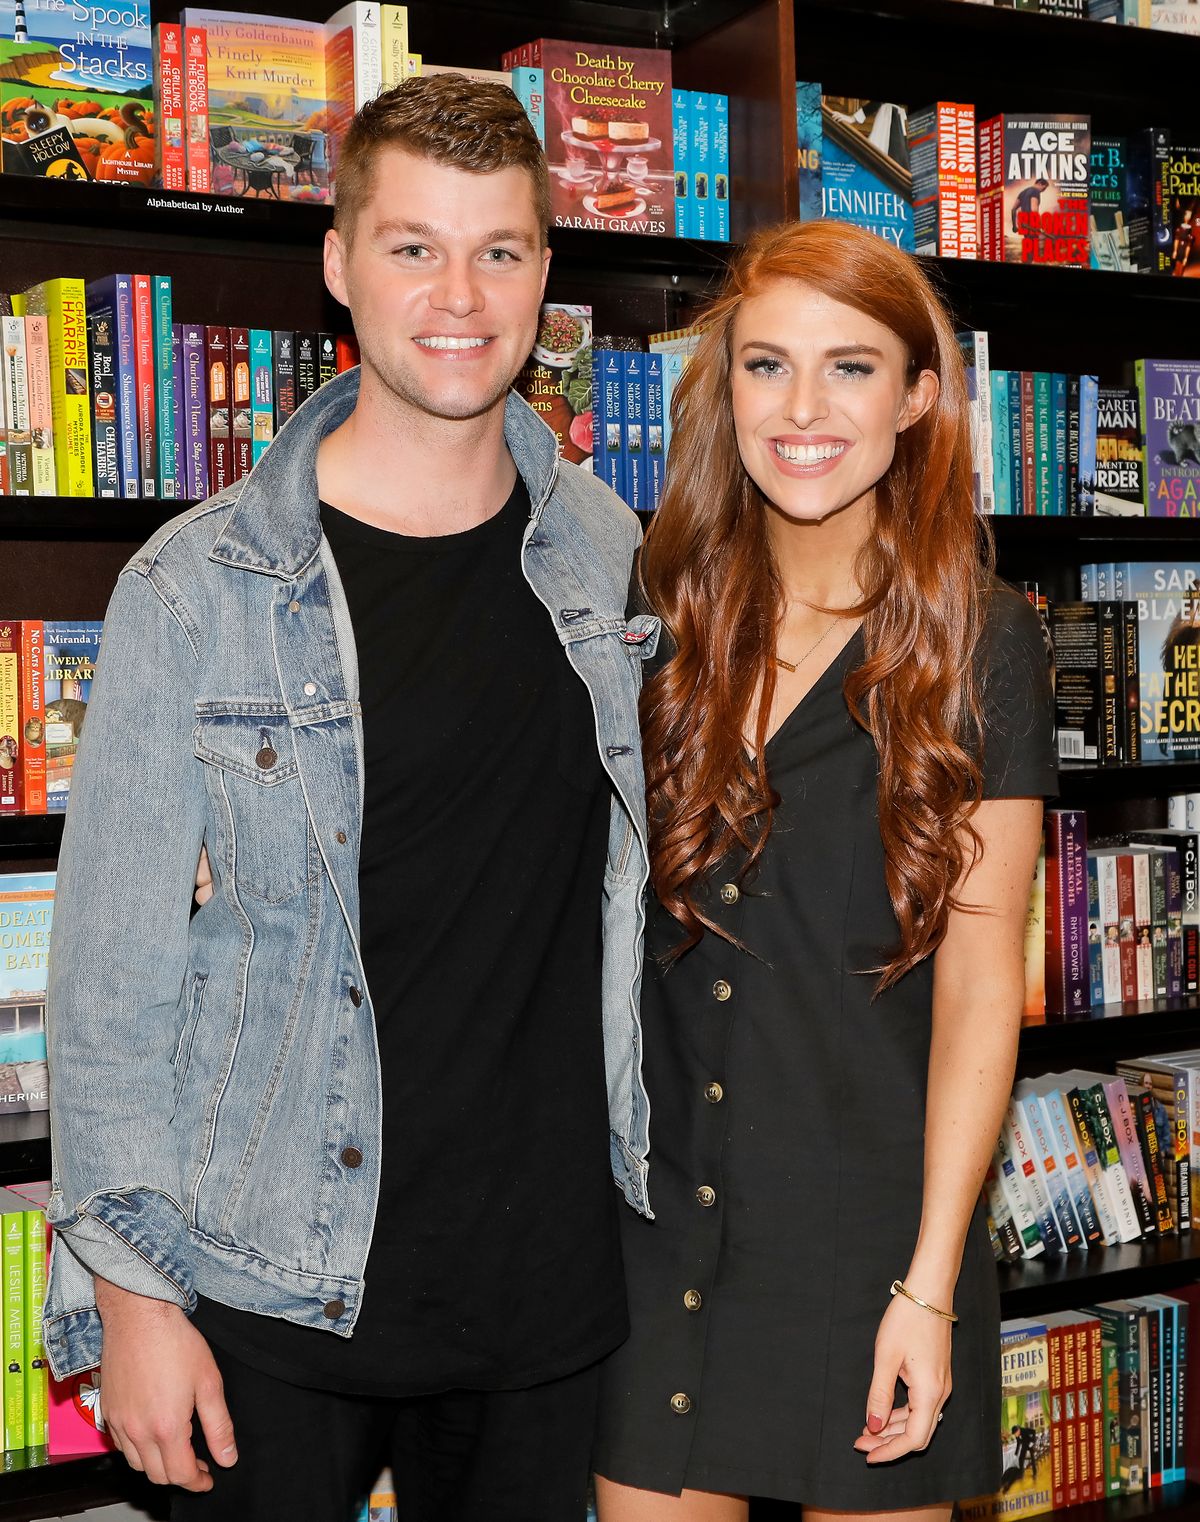 Jeremy and Audrey Roloff celebrate their new book "A Love Letter Life" at Barnes & Noble on April 10, 2019, in Los Angeles, California | Photo: Tibrina Hobson/Getty Images